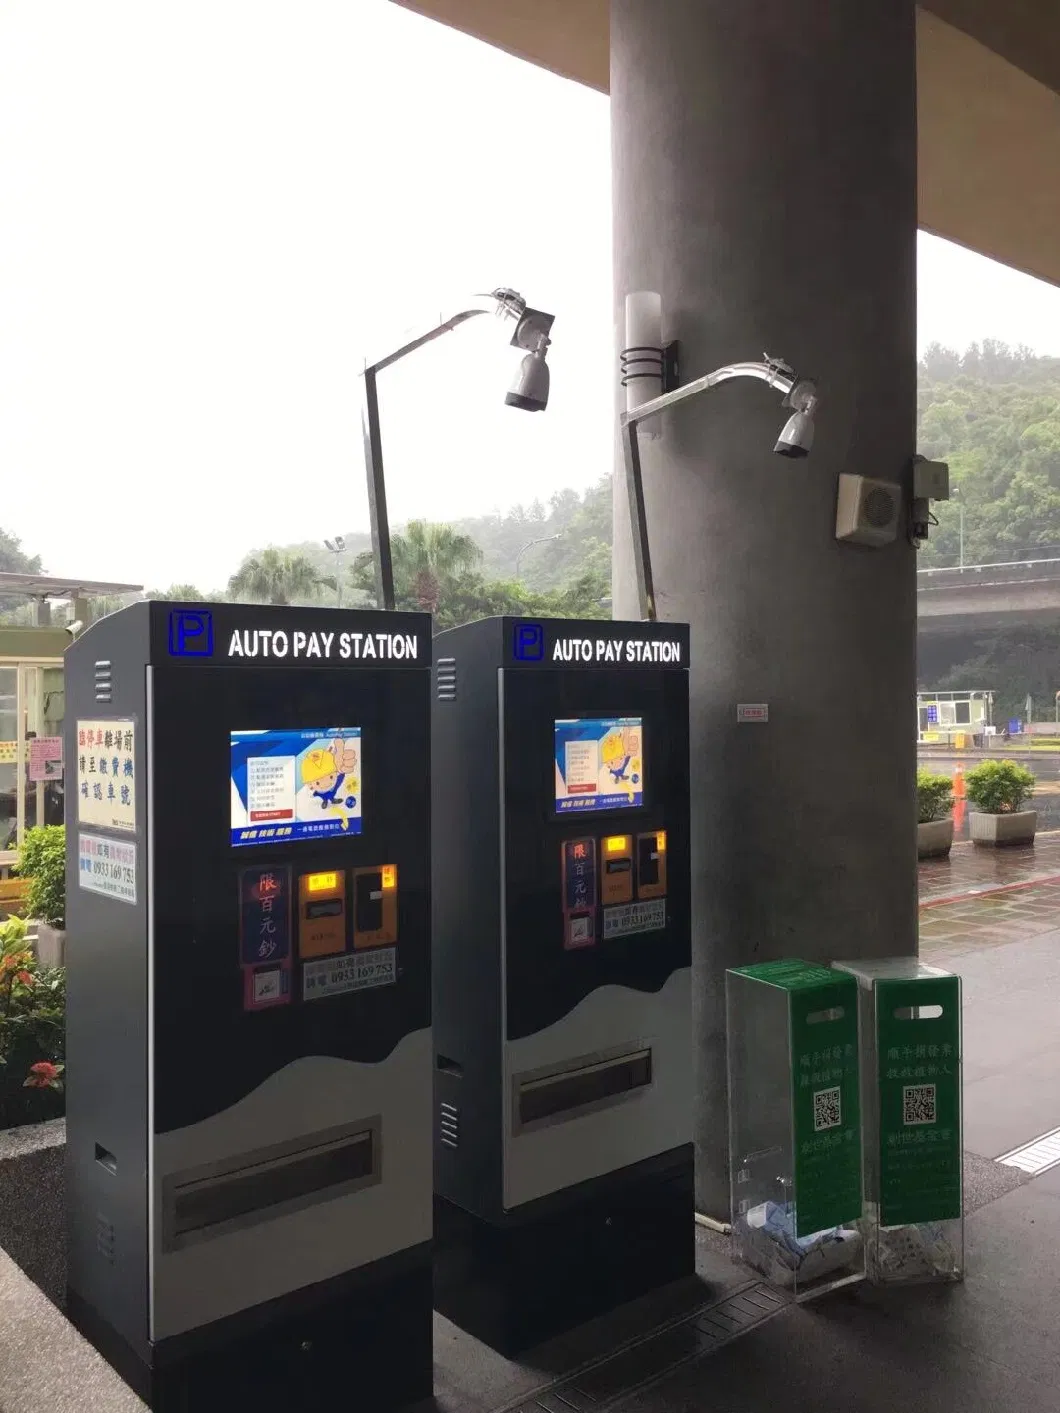 Self-Service Payment Station for Parking